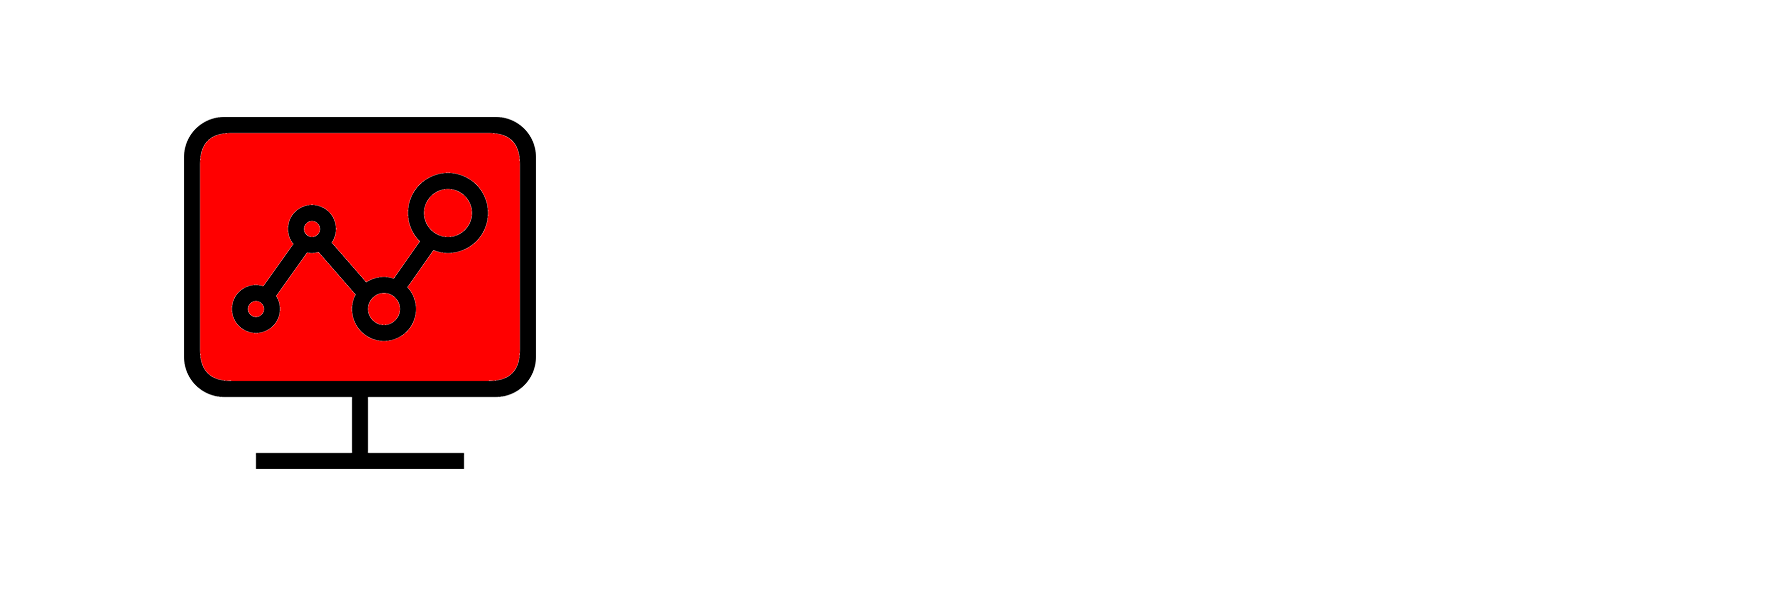 Journal of Soft Computing and Data Mining